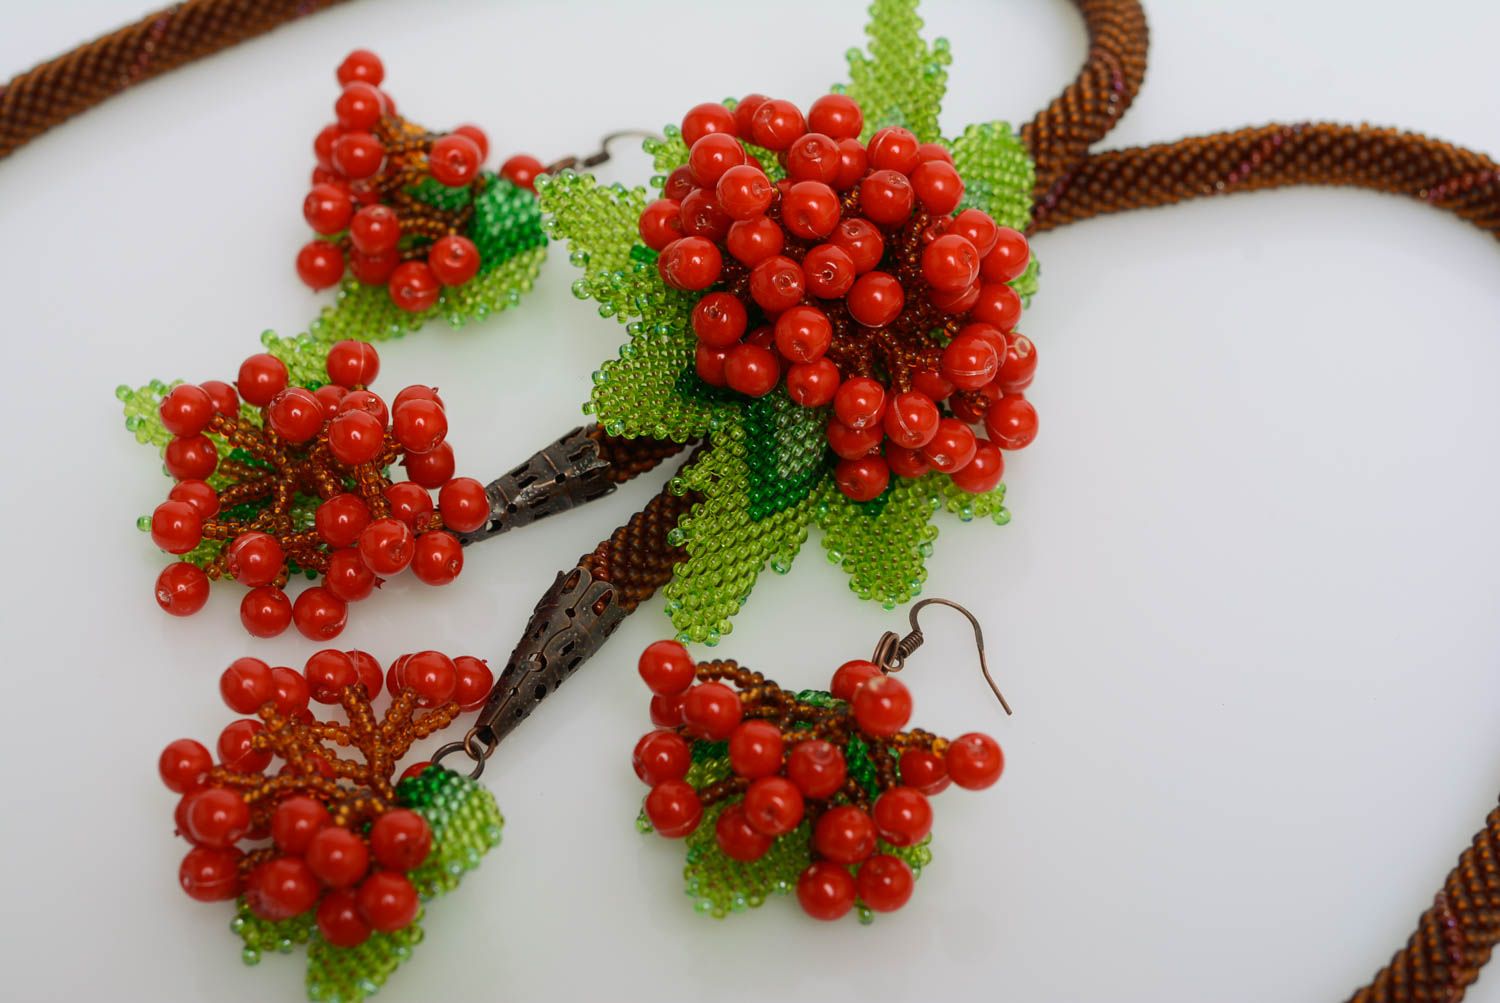 Set of beaded jewelry cord necklace and earrings handmade accessories Kalina photo 2